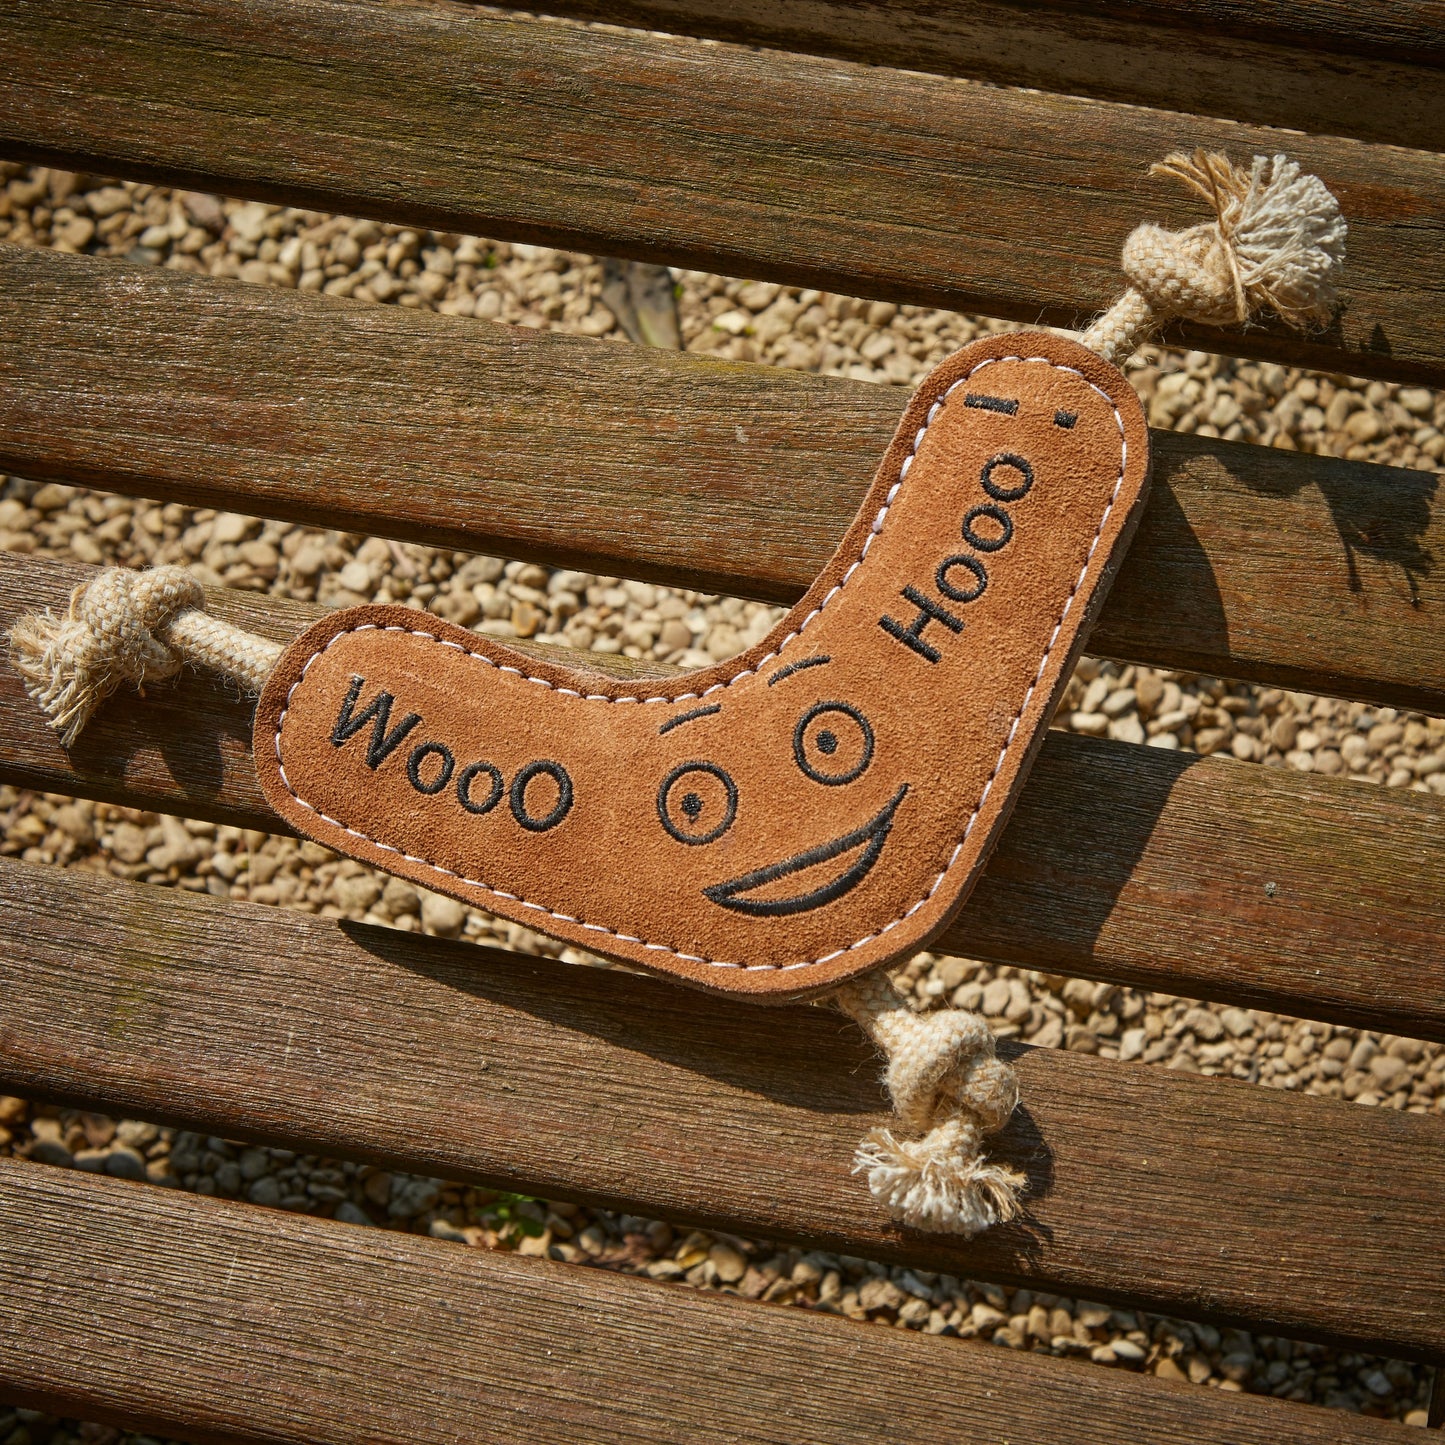 Benny the Boomerang, Eco Toy